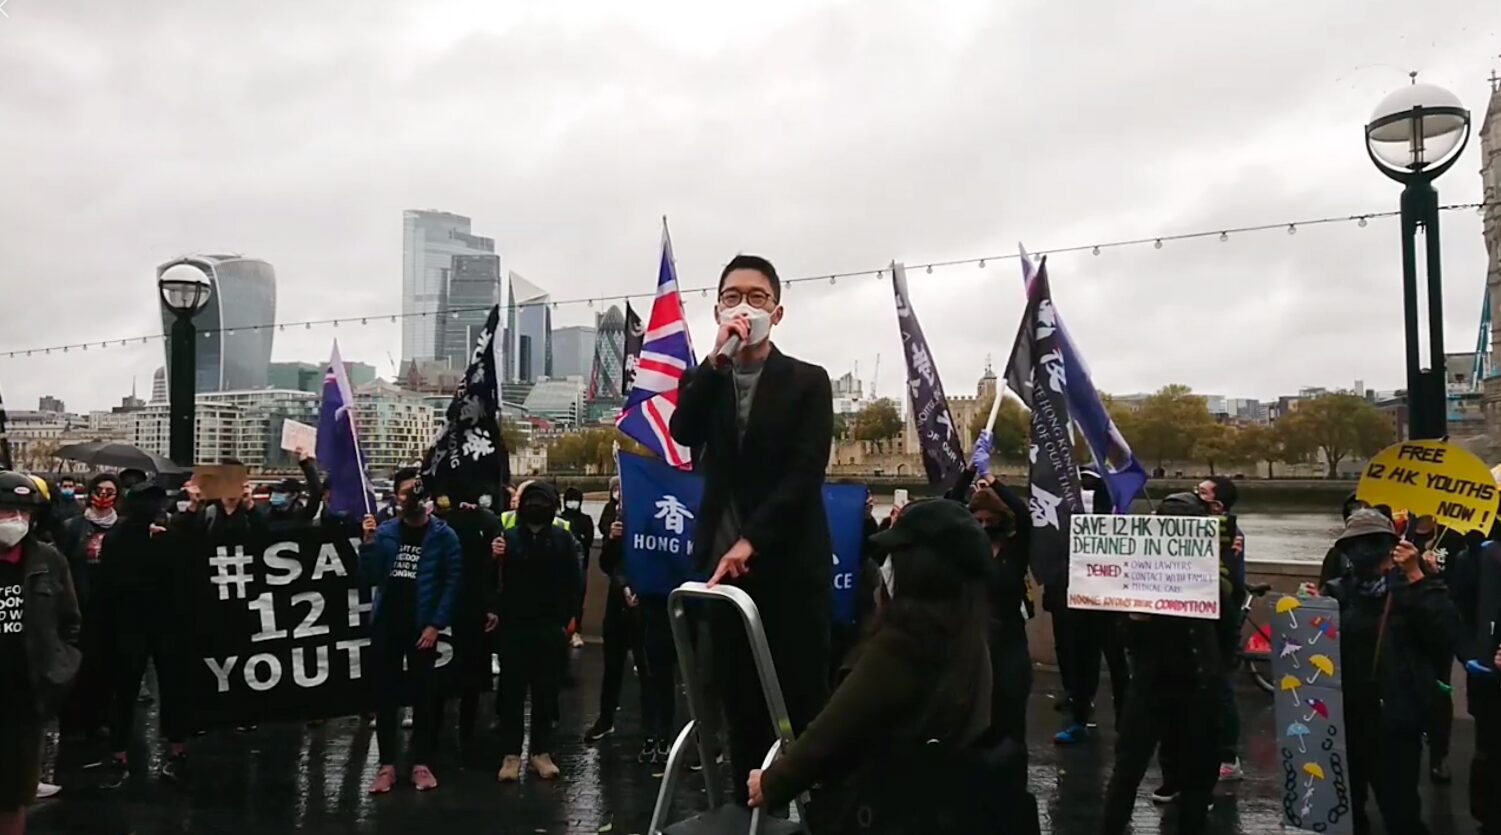 The Hong Kong government has revoked the passports of pro-democracy supporters in the UK